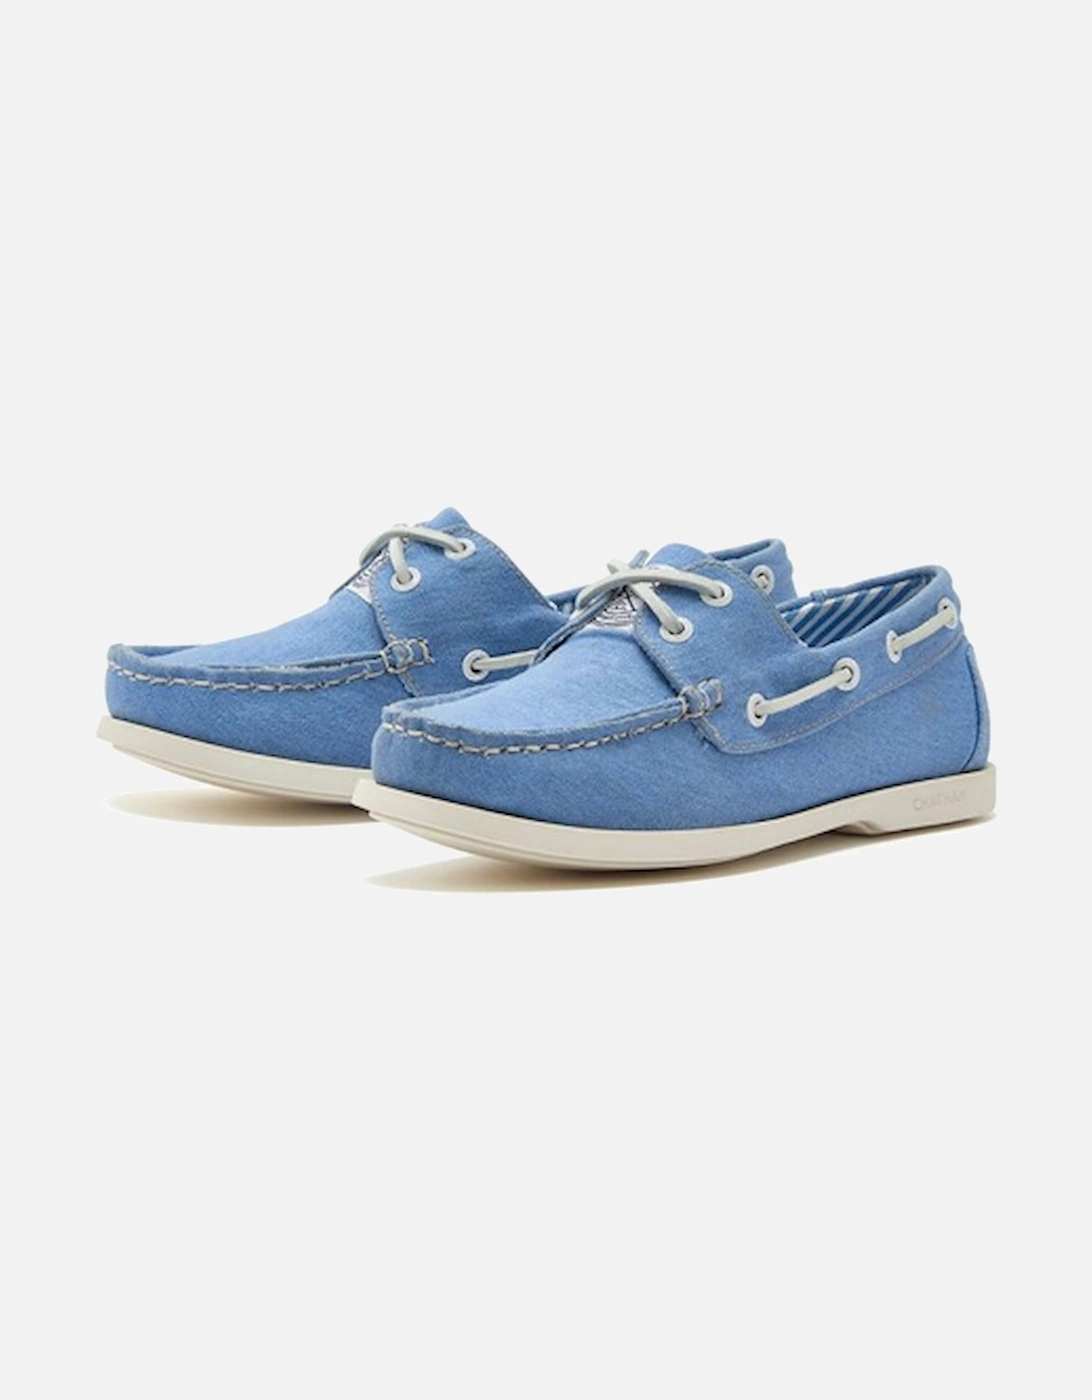 X Joules Women's Jetty Lady Canvas Boat Shoes Blue